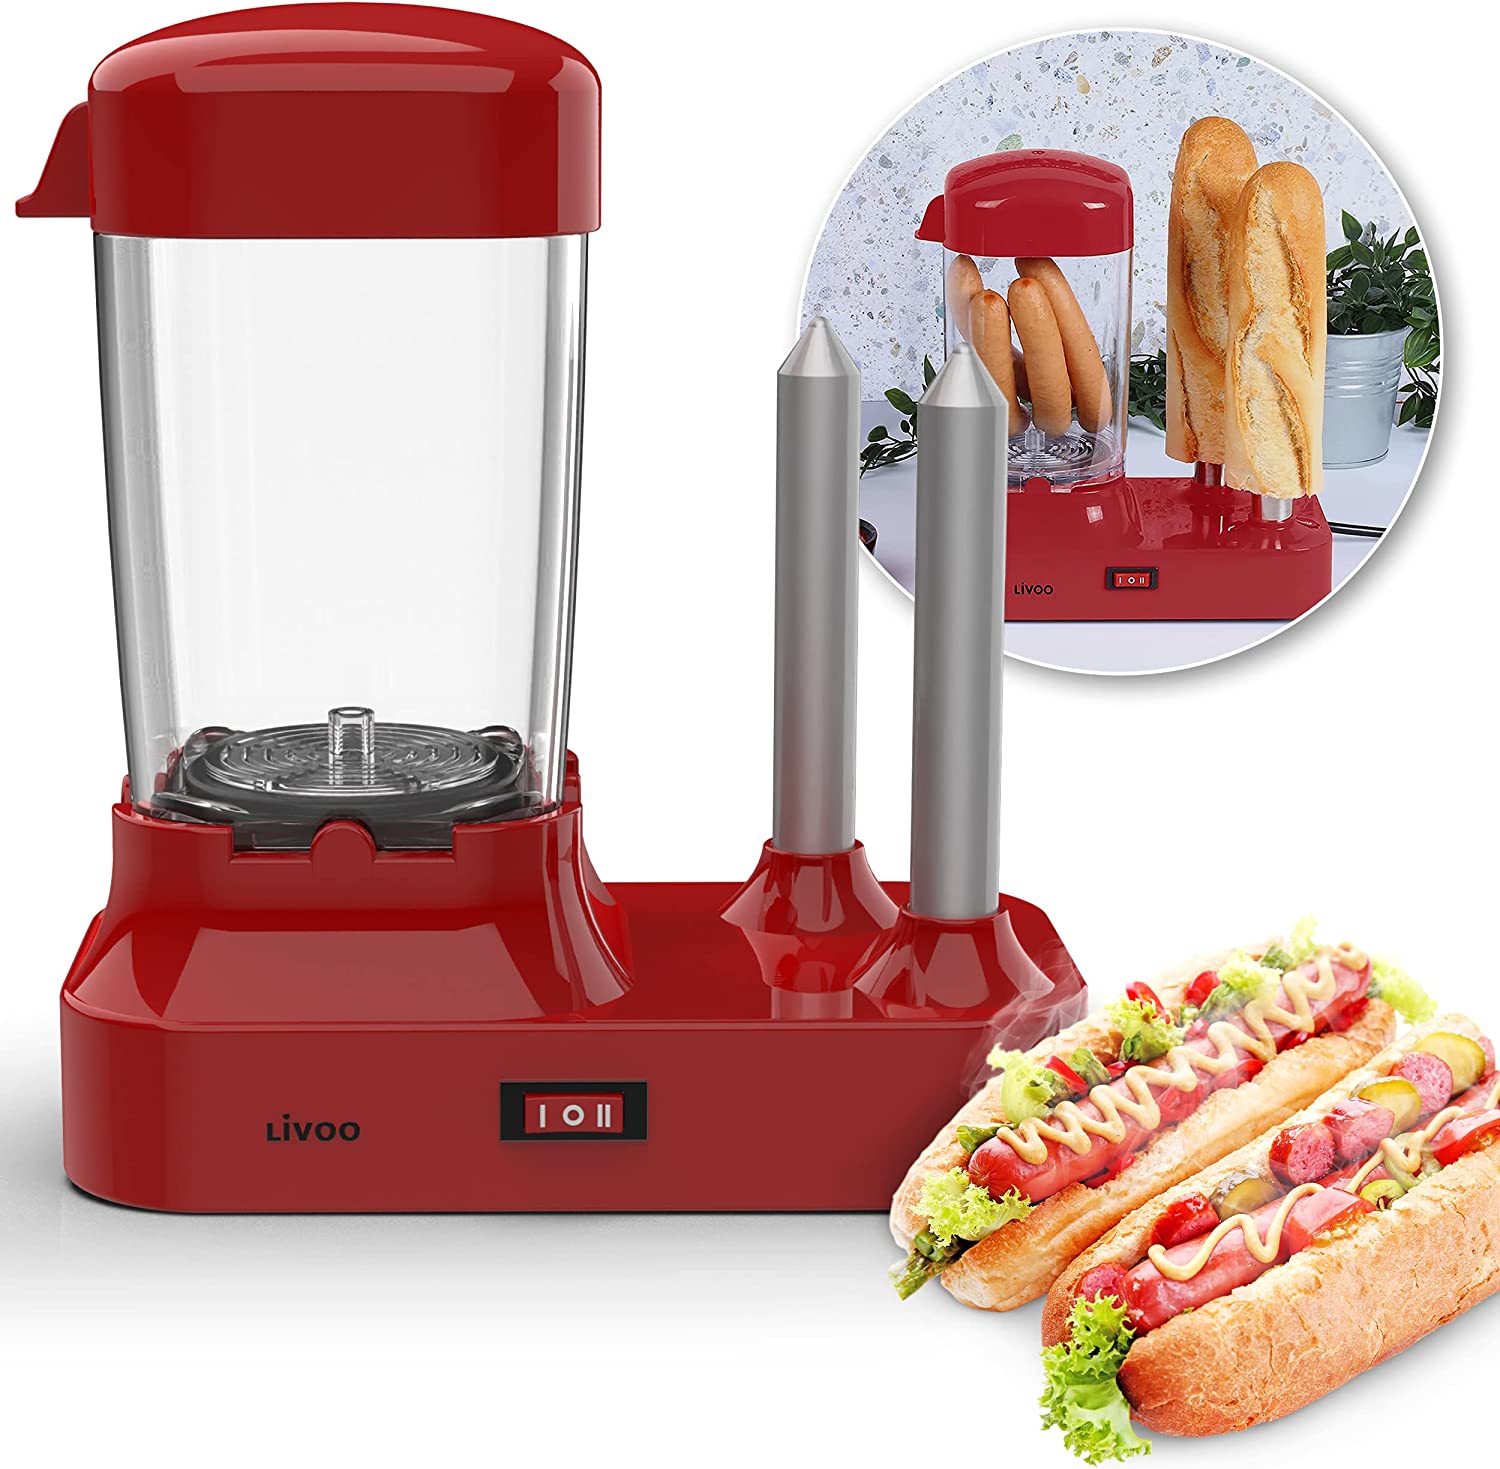 bmf-versand® Hot Dog Maker with 2 Bun Warmers, Hotdog Machine for 6 Sausages, Removable Heat Container, Electric Sausage Warmer, with Stainless Steel Skewers for Heating Rolls